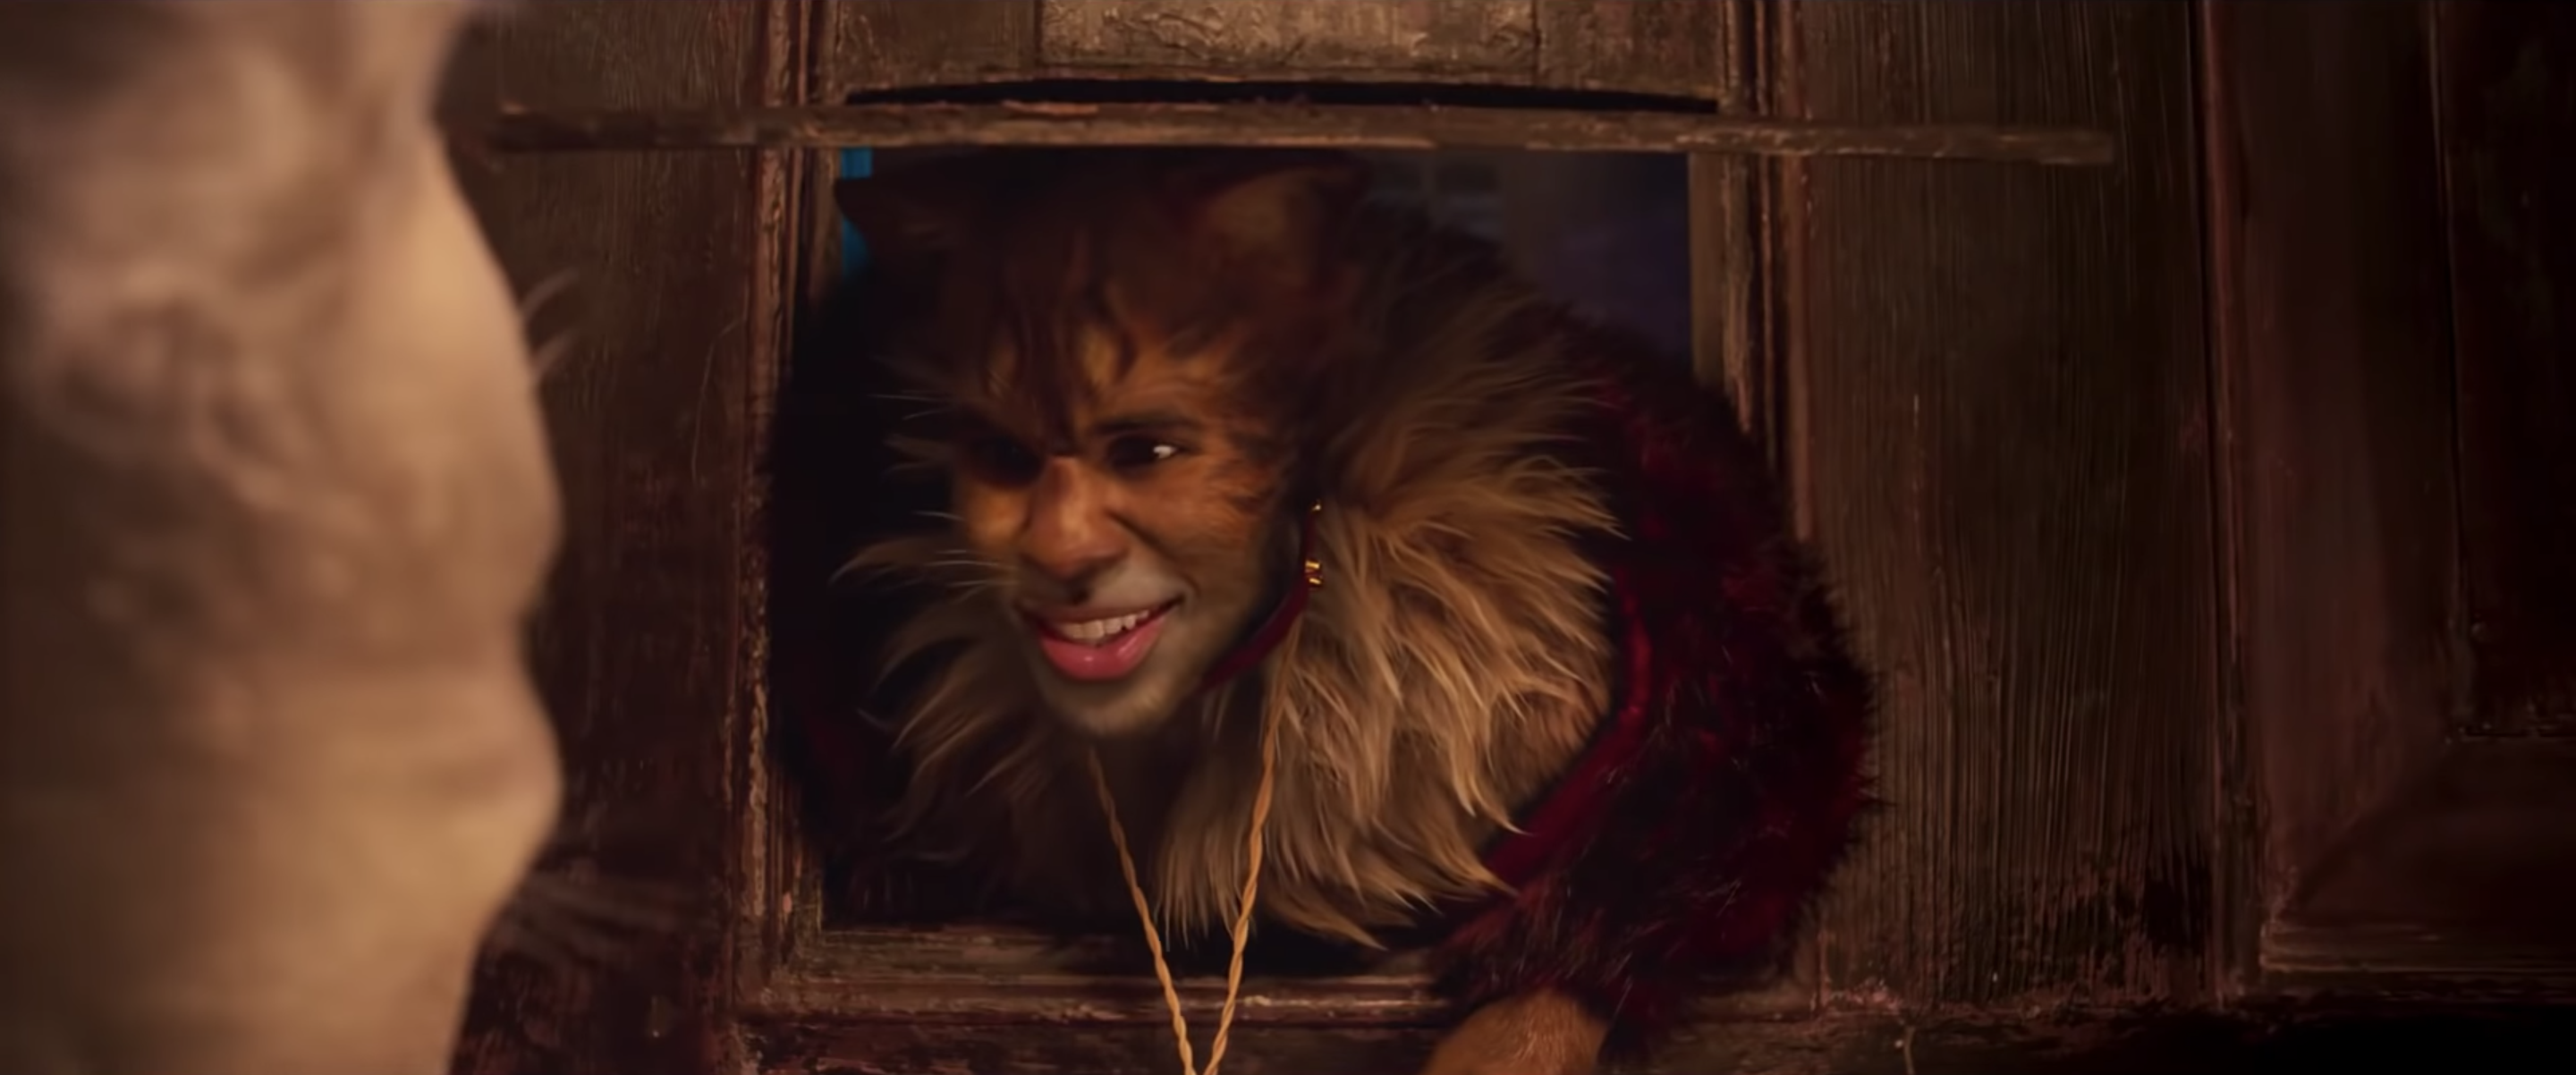 Cats' Review Round-up: Critics Have Explosive Emotions on New Movie